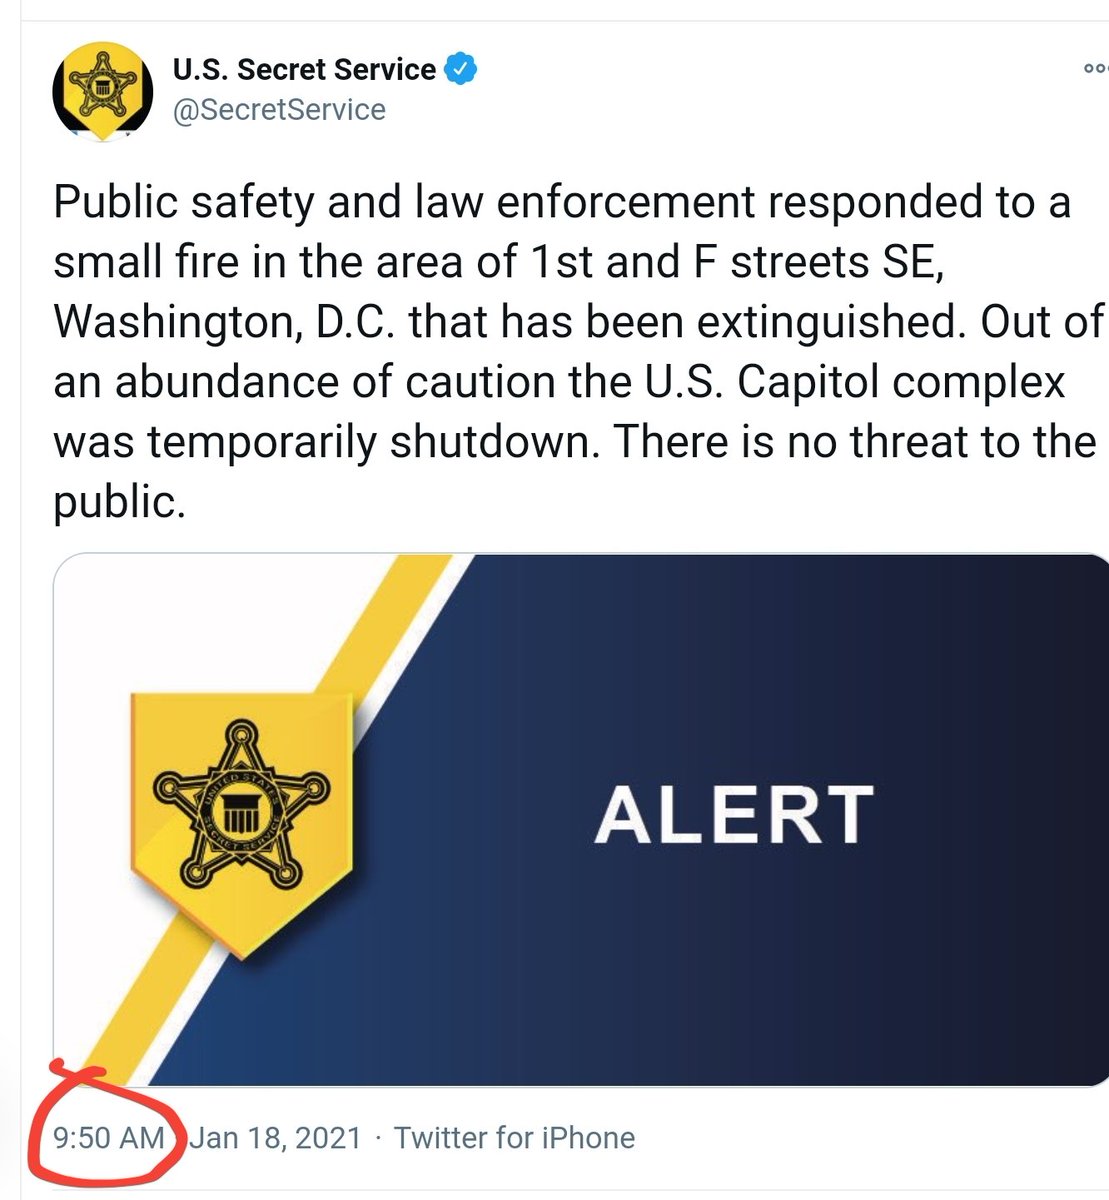 20)Some might recall the fire and evacuation this morning and might think that was the event triggering COGCON 2.The Fire was reported at 9:50 am and the COGCON 2 notifications were sent around 8:04am